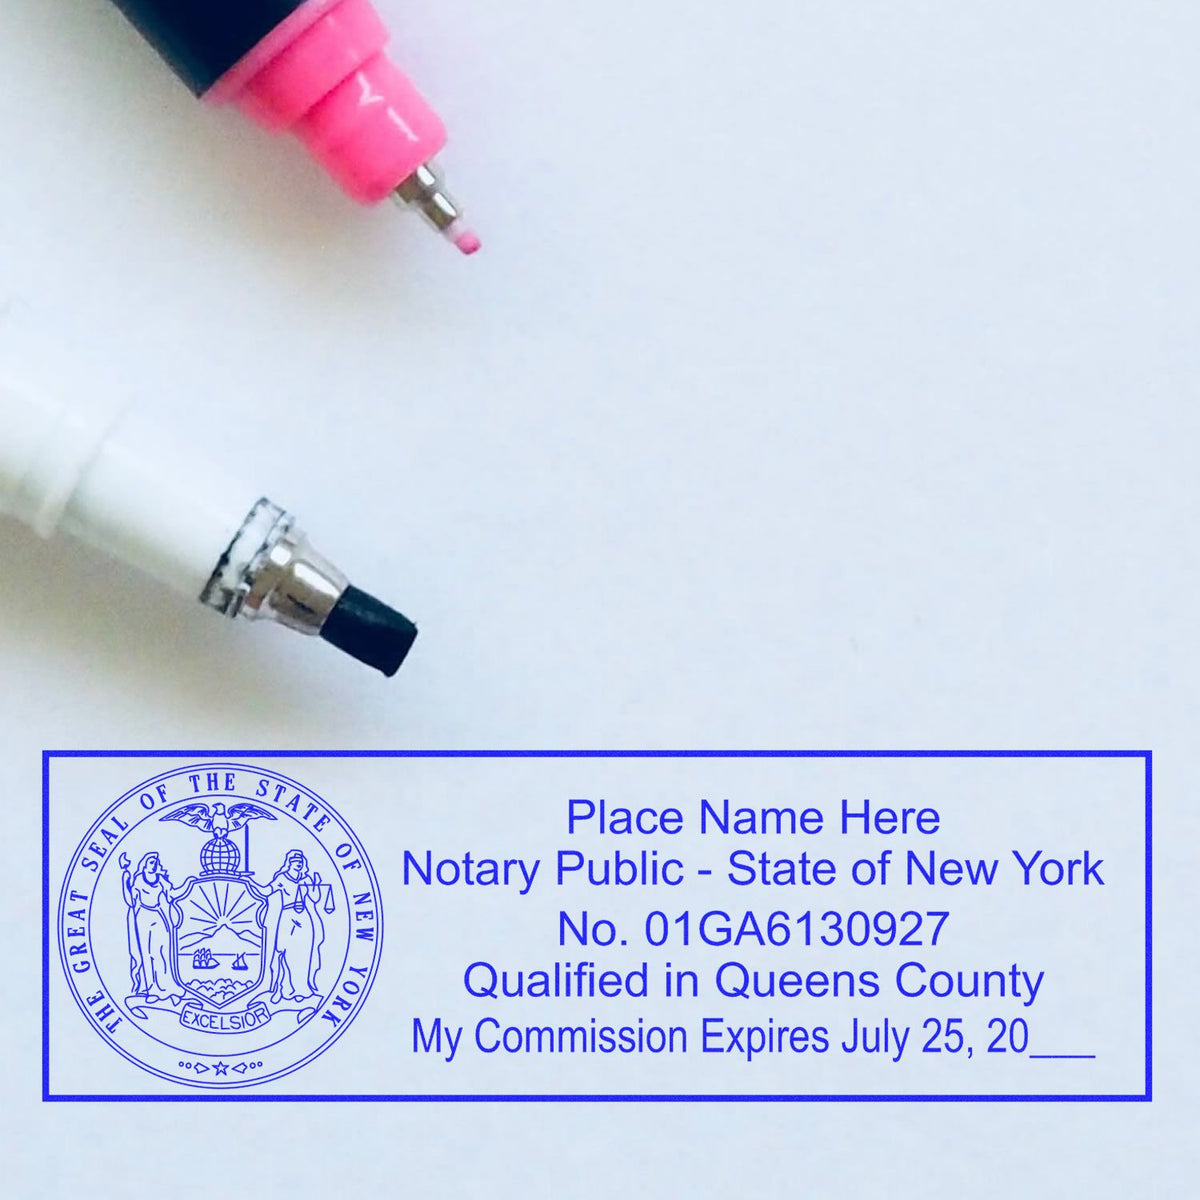 This paper is stamped with a sample imprint of the Slim Pre-Inked State Seal Notary Stamp for New York, signifying its quality and reliability.